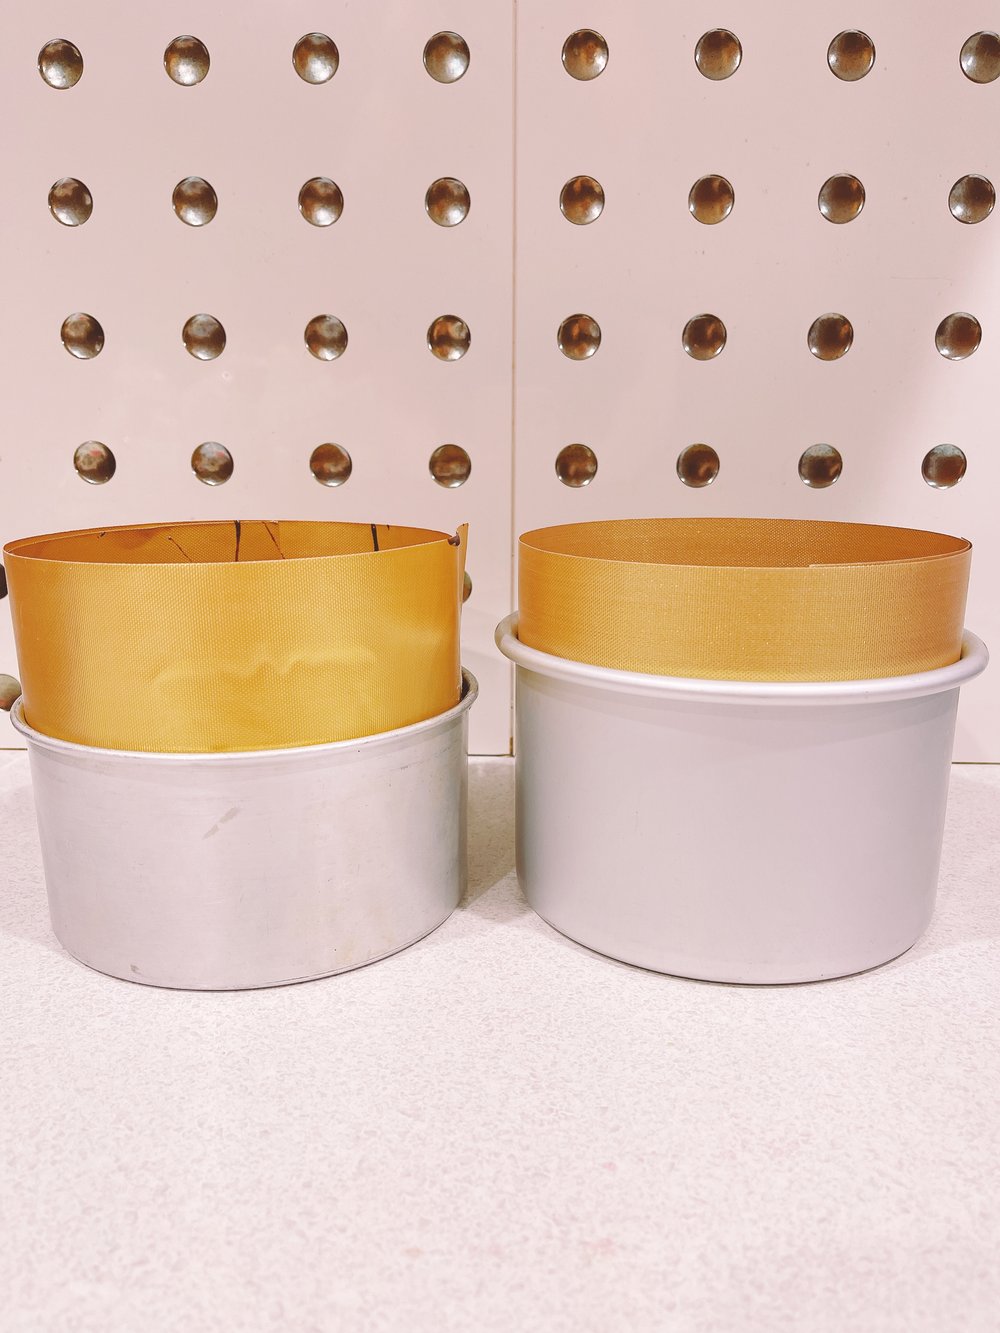 MORE LINER 6inch Round Reusable Cake Tin Liner